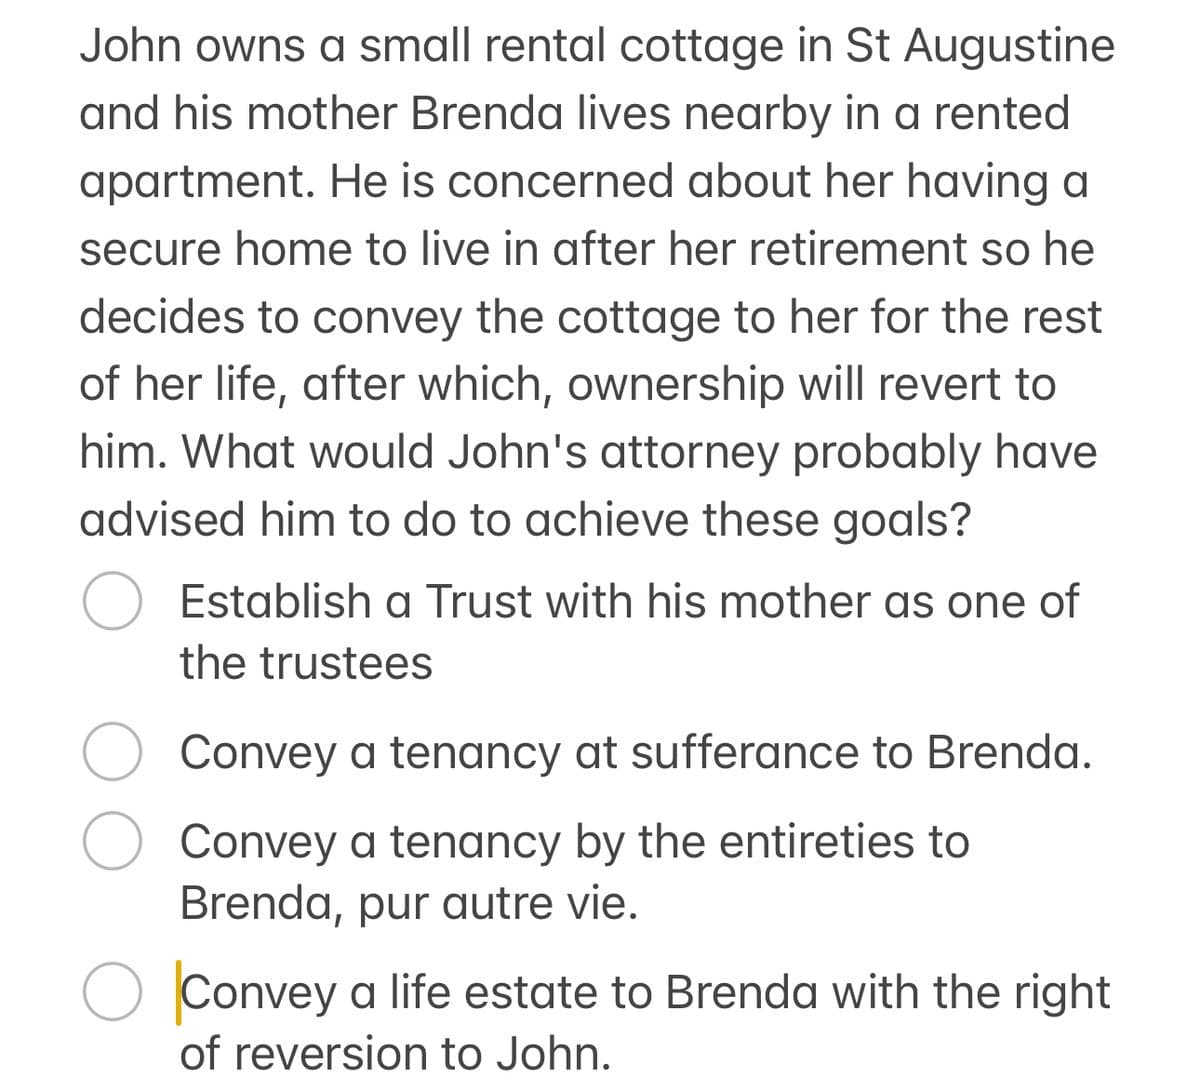 John owns a small rental cottage in St Augustine
and his mother Brenda lives nearby in a rented
apartment. He is concerned about her having a
secure home to live in after her retirement so he
decides to convey the cottage to her for the rest
of her life, after which, ownership will revert to
him. What would John's attorney probably have
advised him to do to achieve these goals?
Establish a Trust with his mother as one of
the trustees
Convey a tenancy at sufferance to Brenda.
Convey a tenancy by the entireties to
Brenda, pur autre vie.
О Convey a life estate to Brenda with the right
of reversion to John.